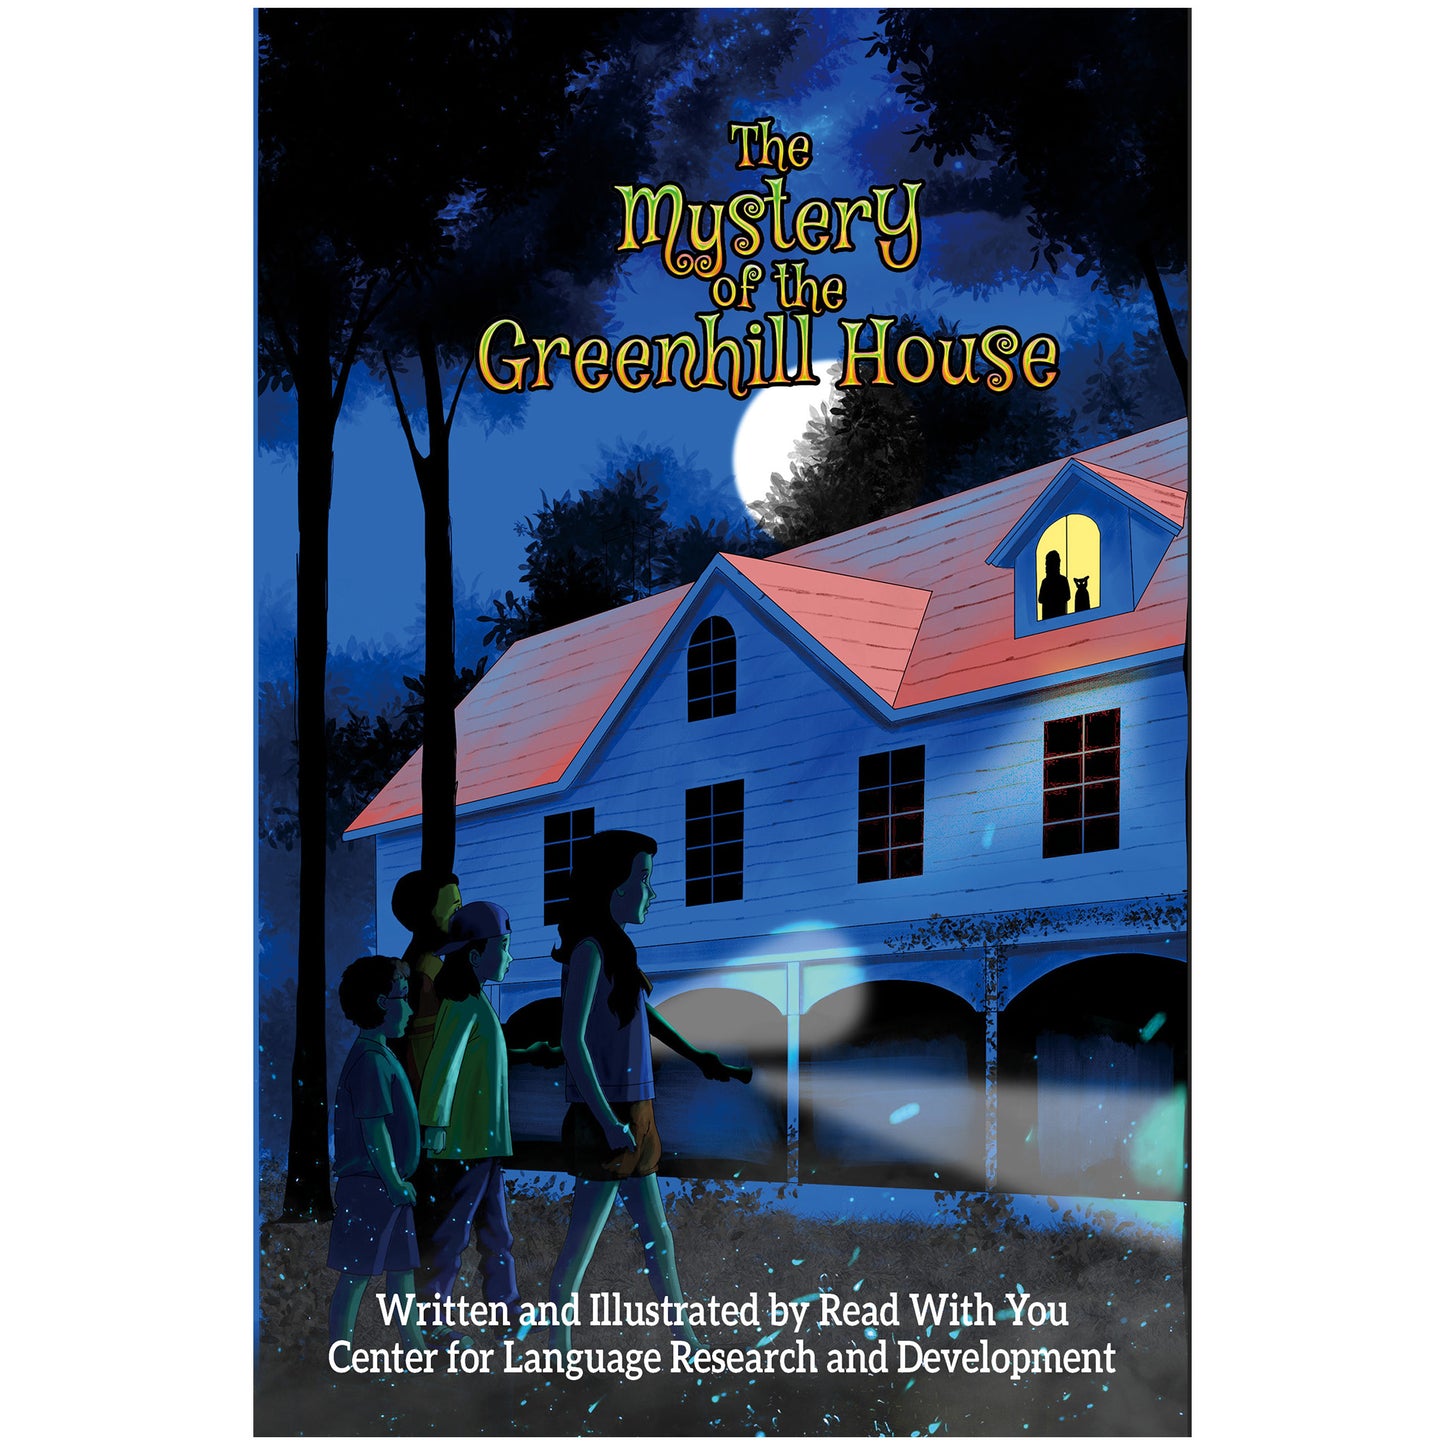 The Mystery of the Greenhill House